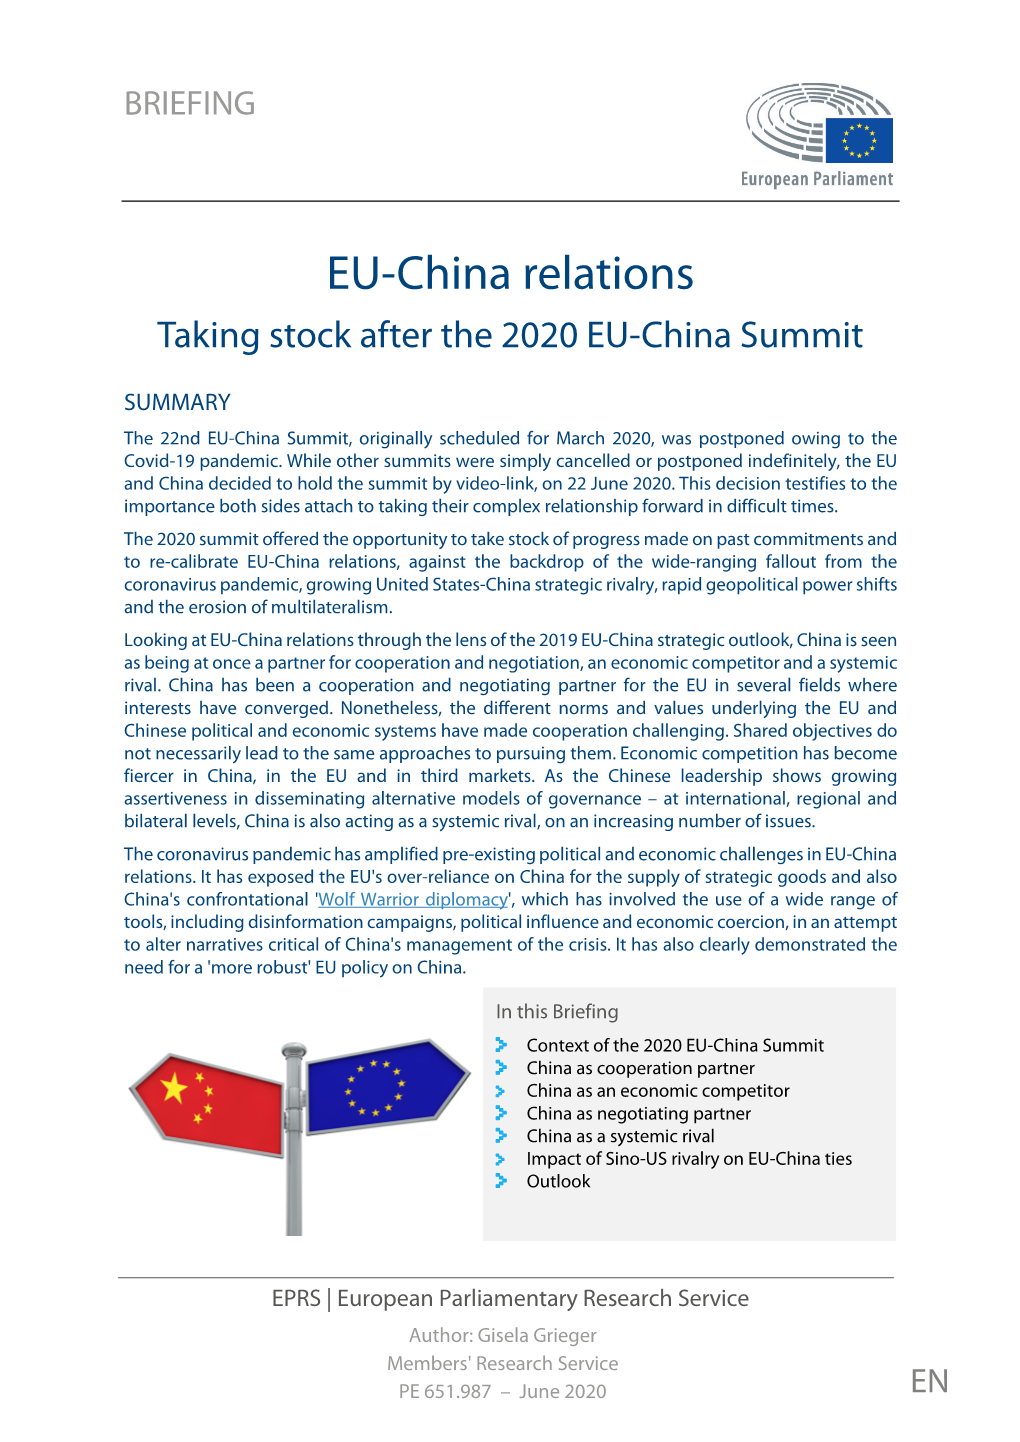 Taking Stock After the 2020 EU-China Summit